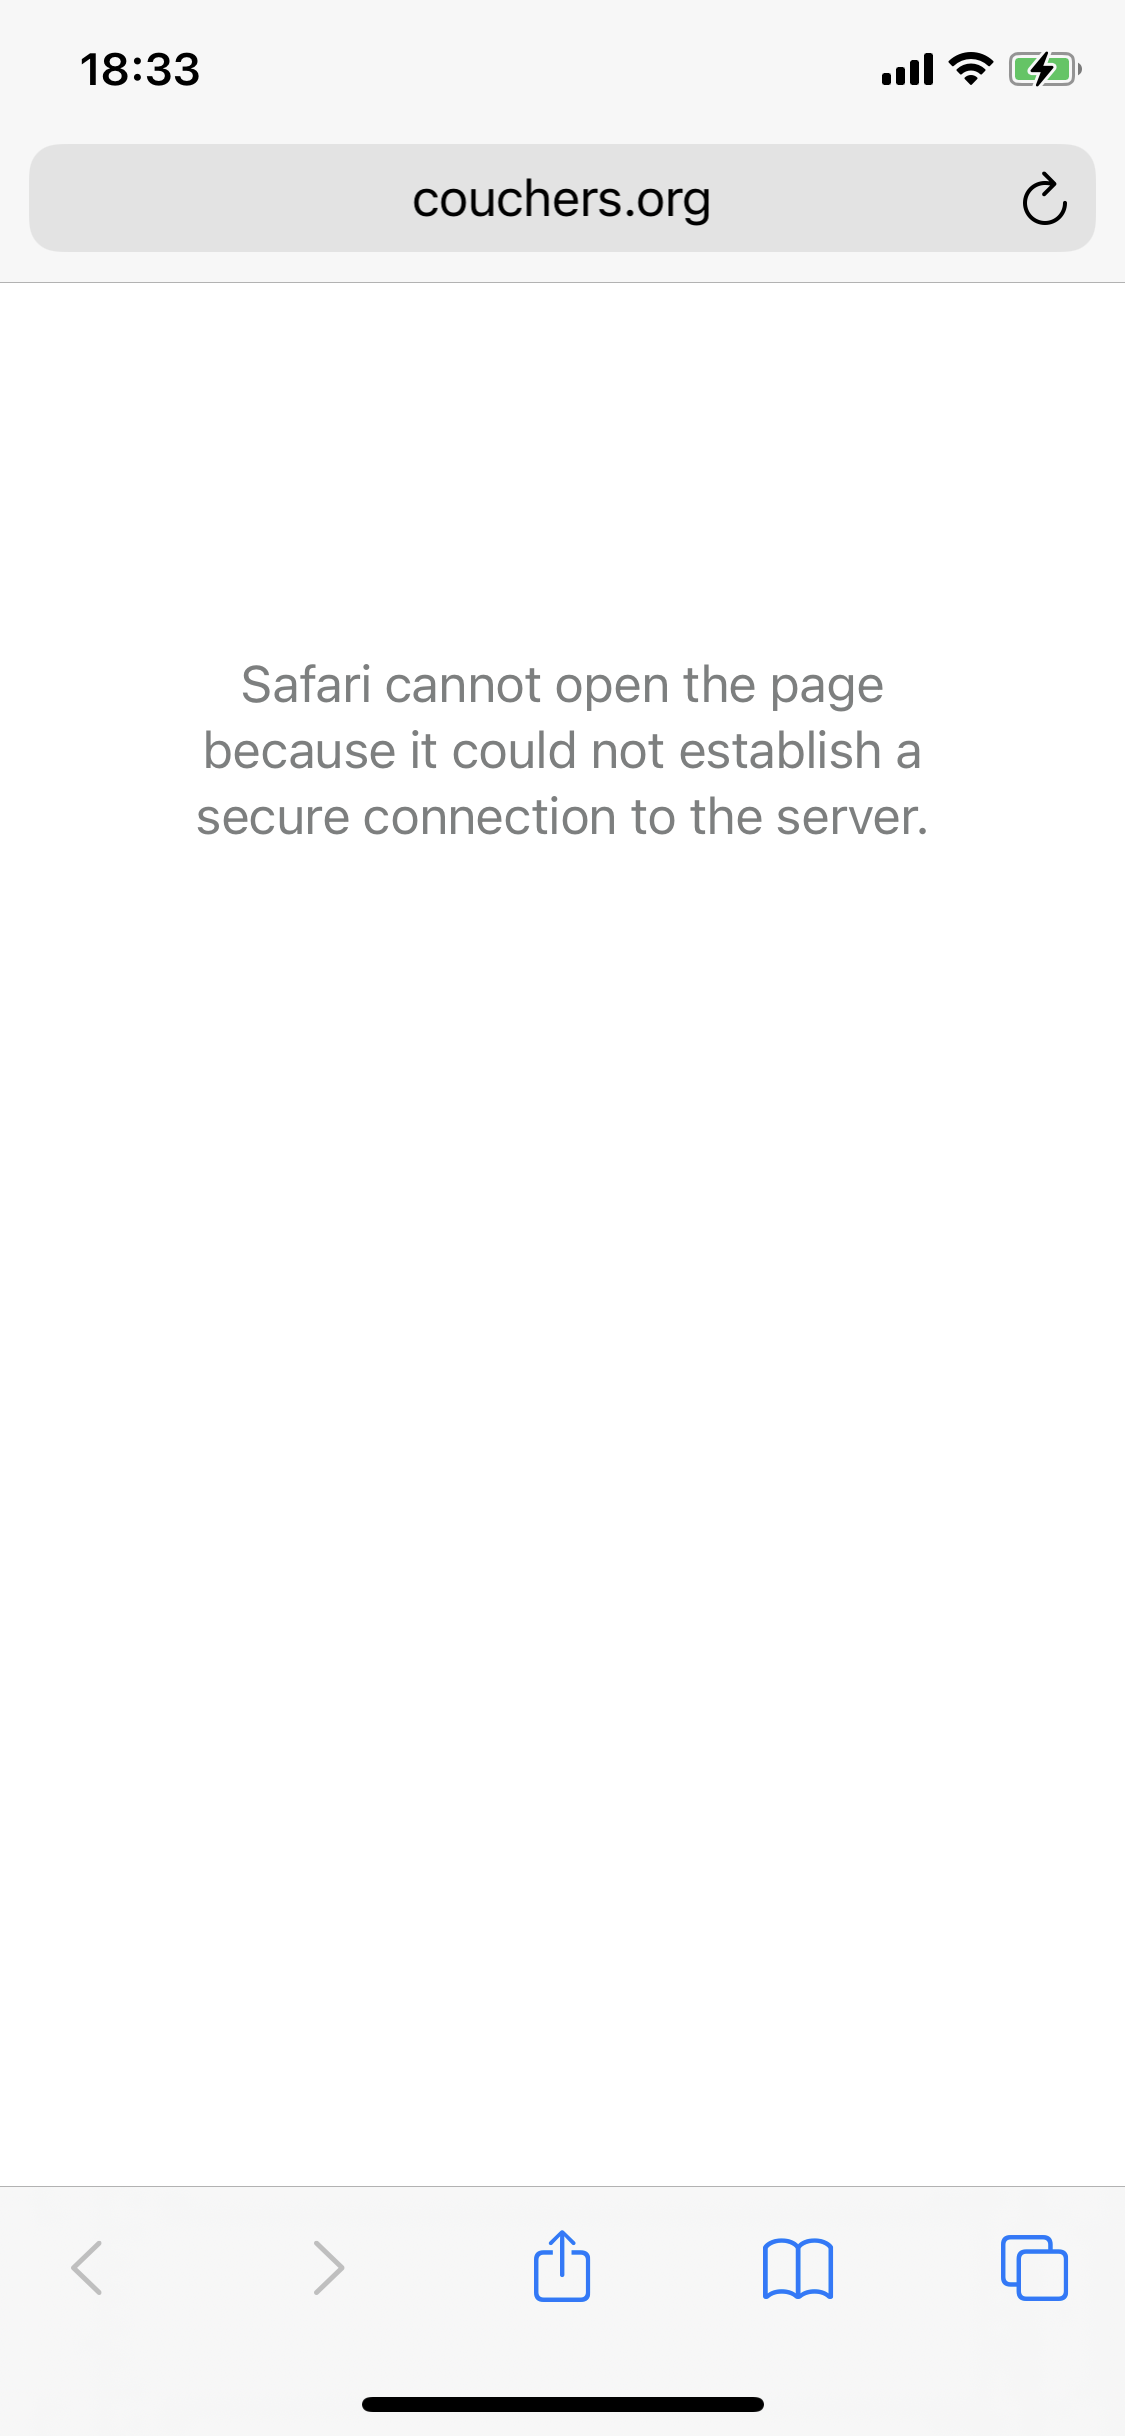 Screenshot of Safari on iPhone refusing to connect to couchers.org when not in a private tab